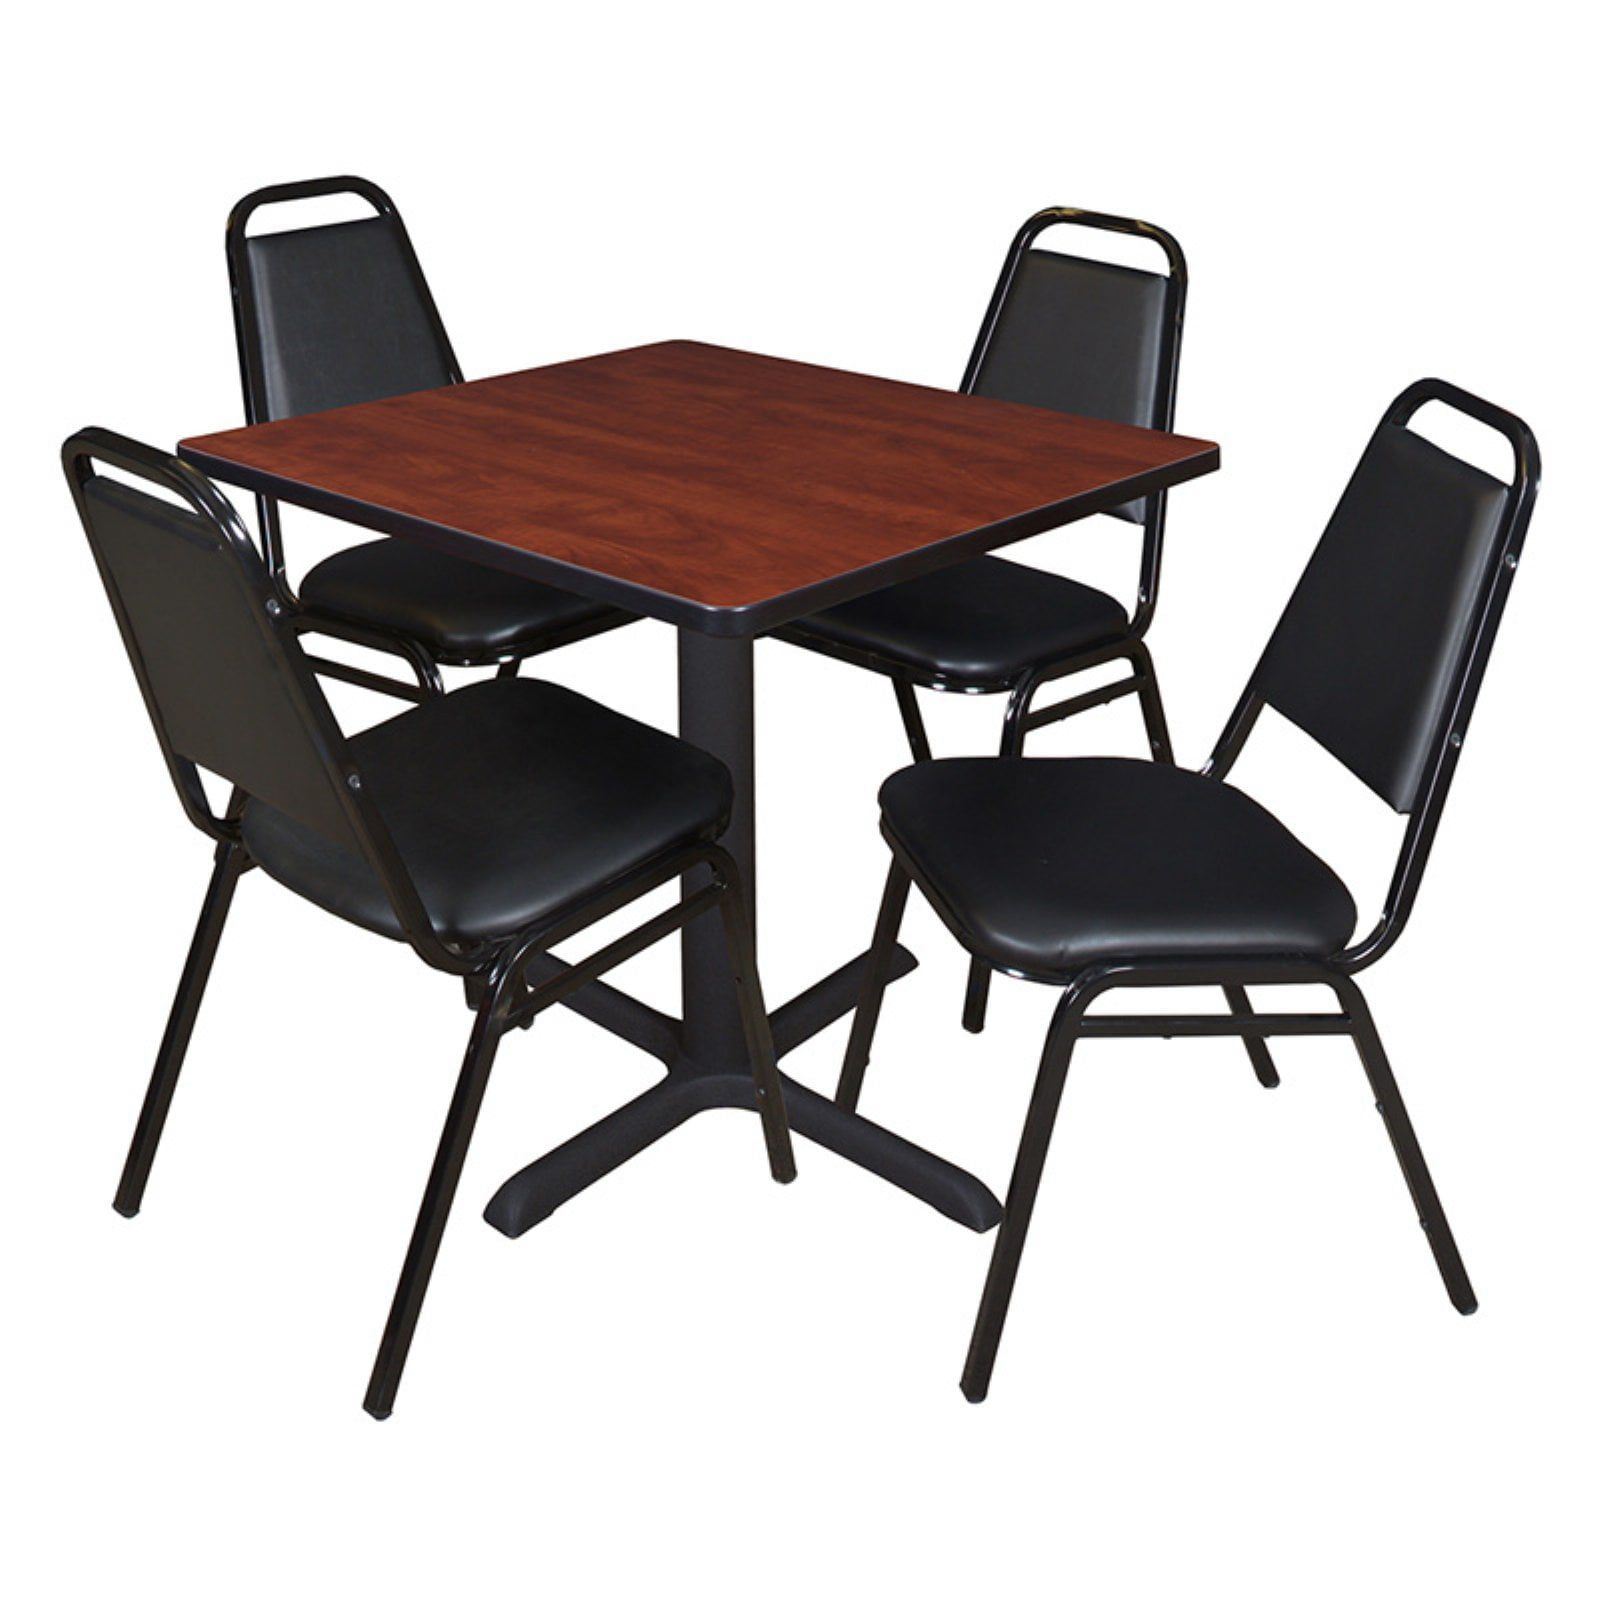 Regency Cain Square Breakroom Table With 4 Stackable Restaurant Chairs For Regency Cain Steel Coffee Tables (View 18 of 21)